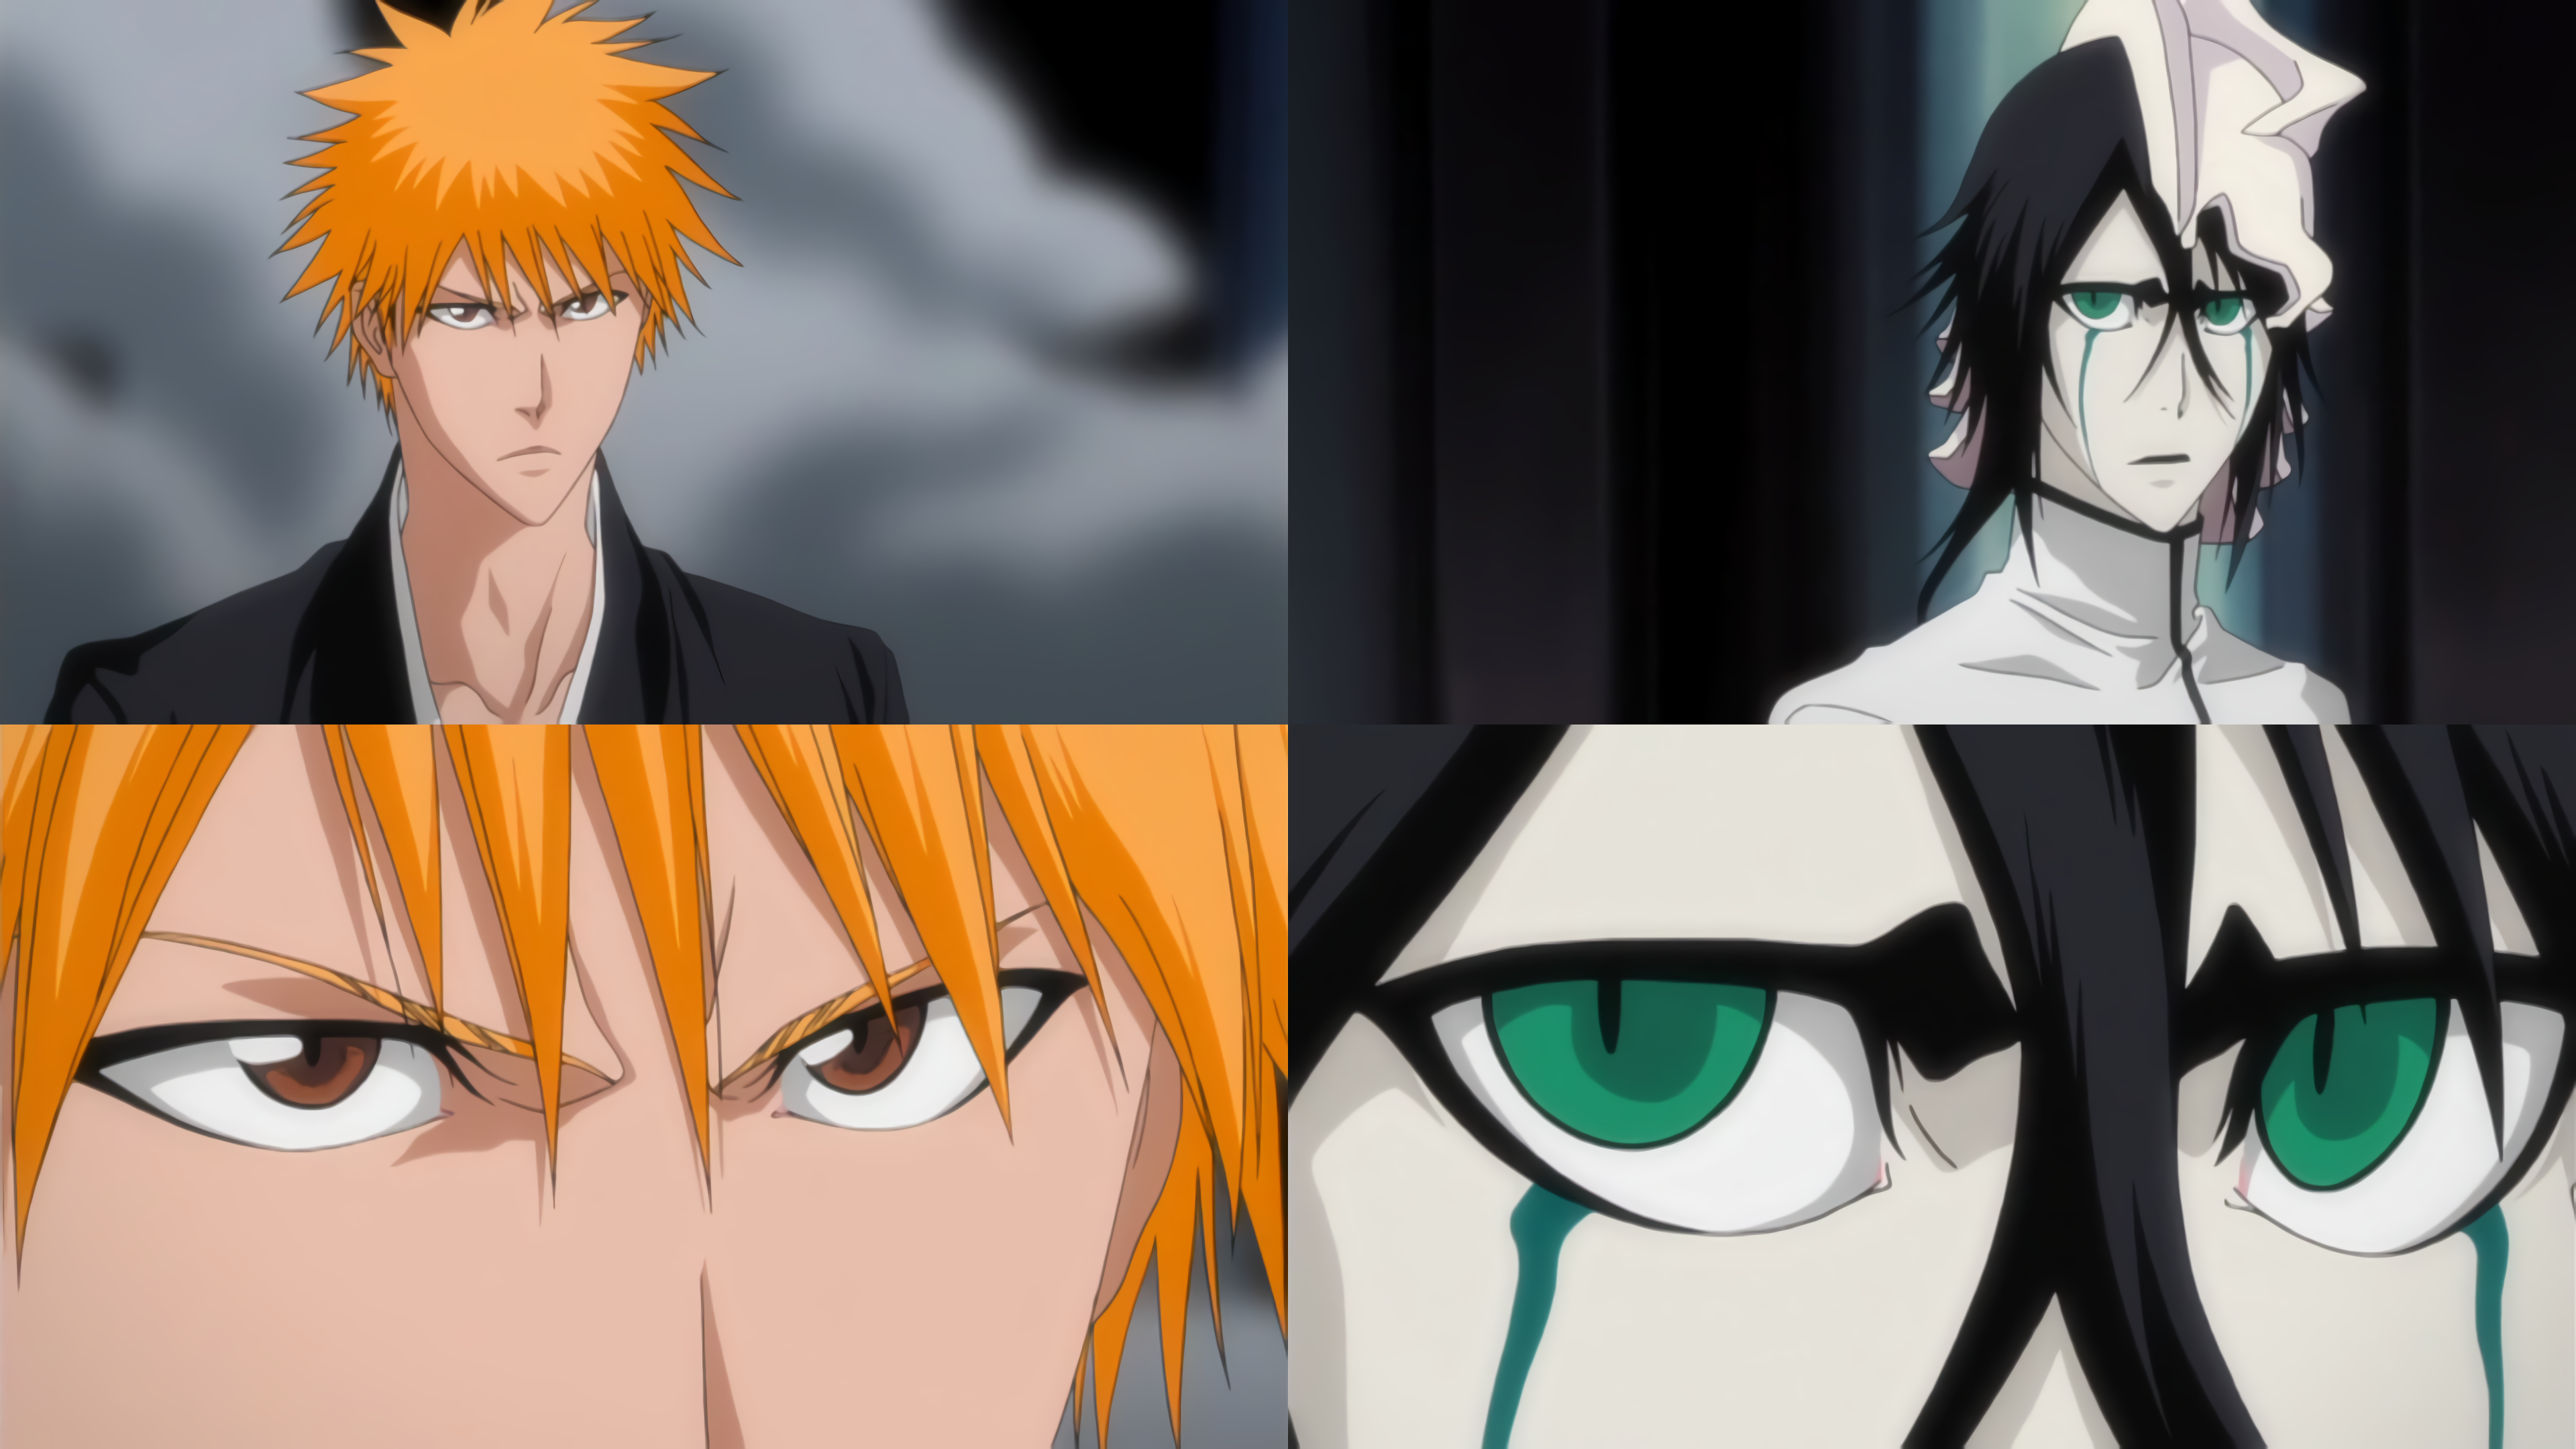 Anyone know where I can find Bleach anime that looks this ...